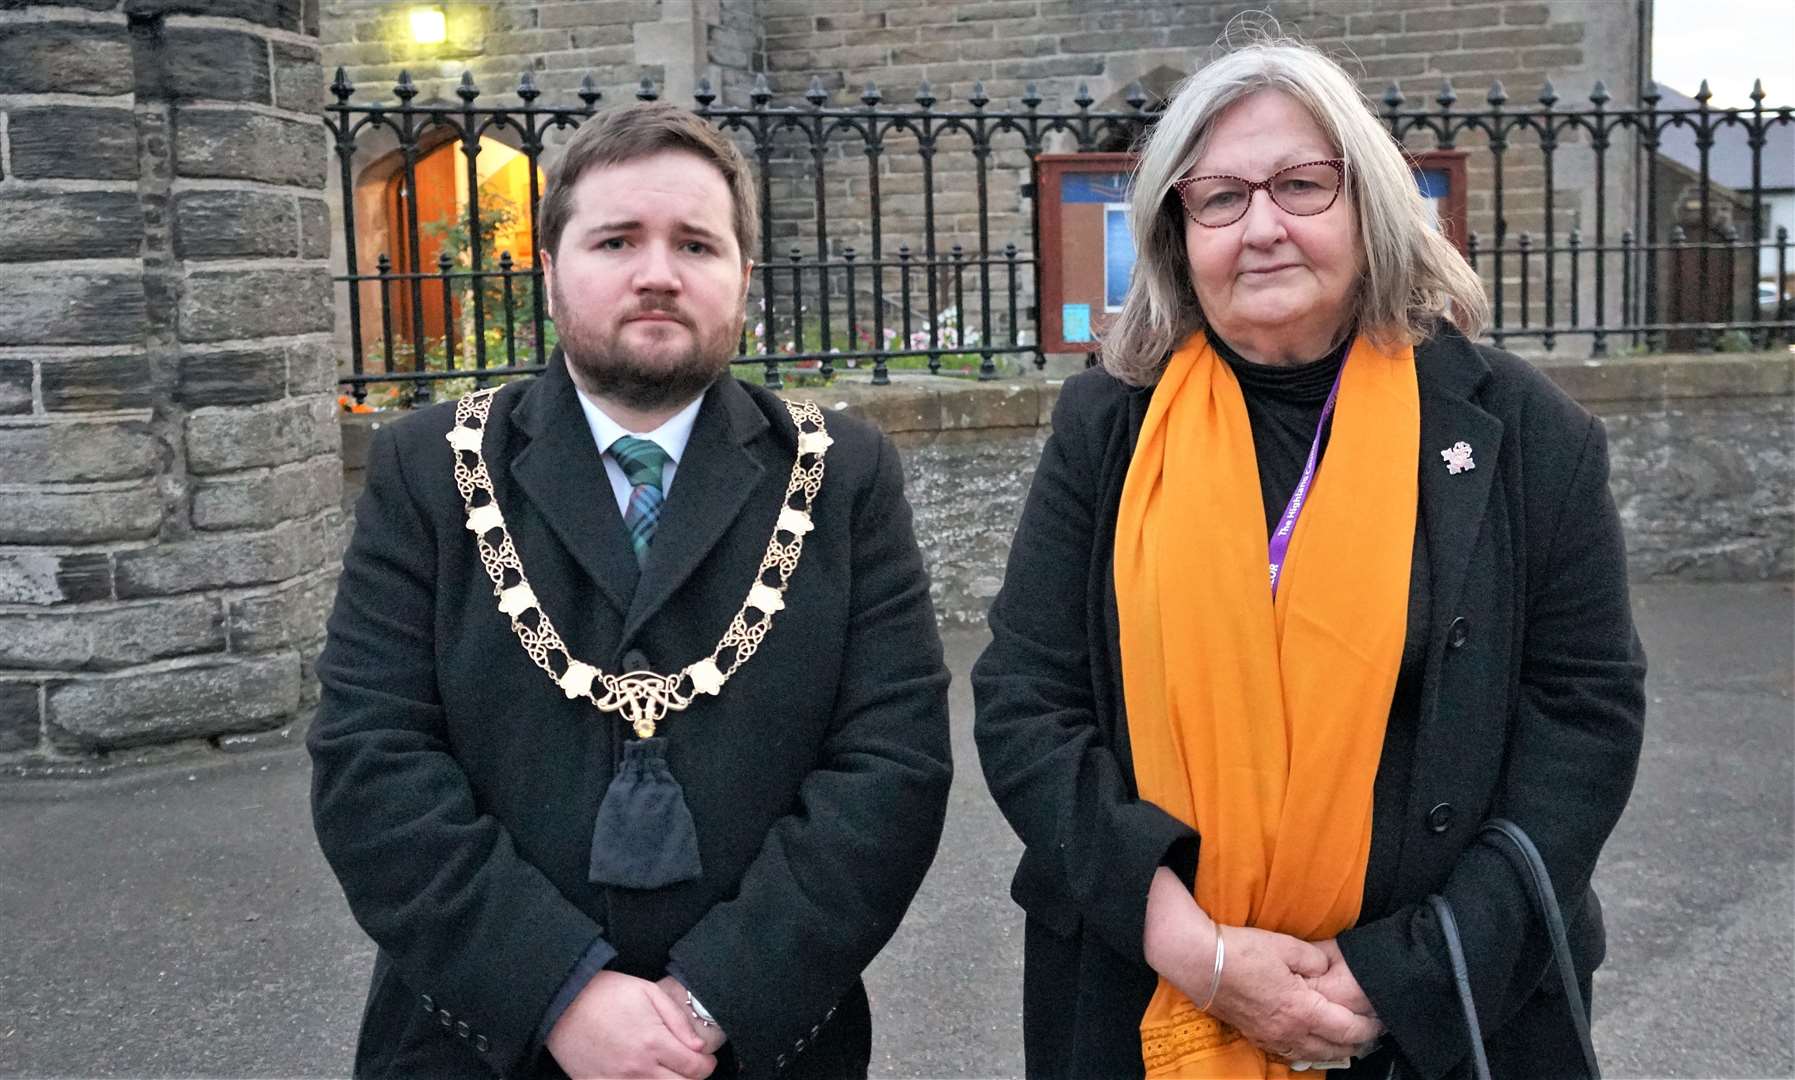 Cllr Struan Mackie spoke at the event as Provost of Thurso and senior civic lead for Caithness. He is pictured with Cllr Jan McEwan who is Provost of Wick. Picture: DGS